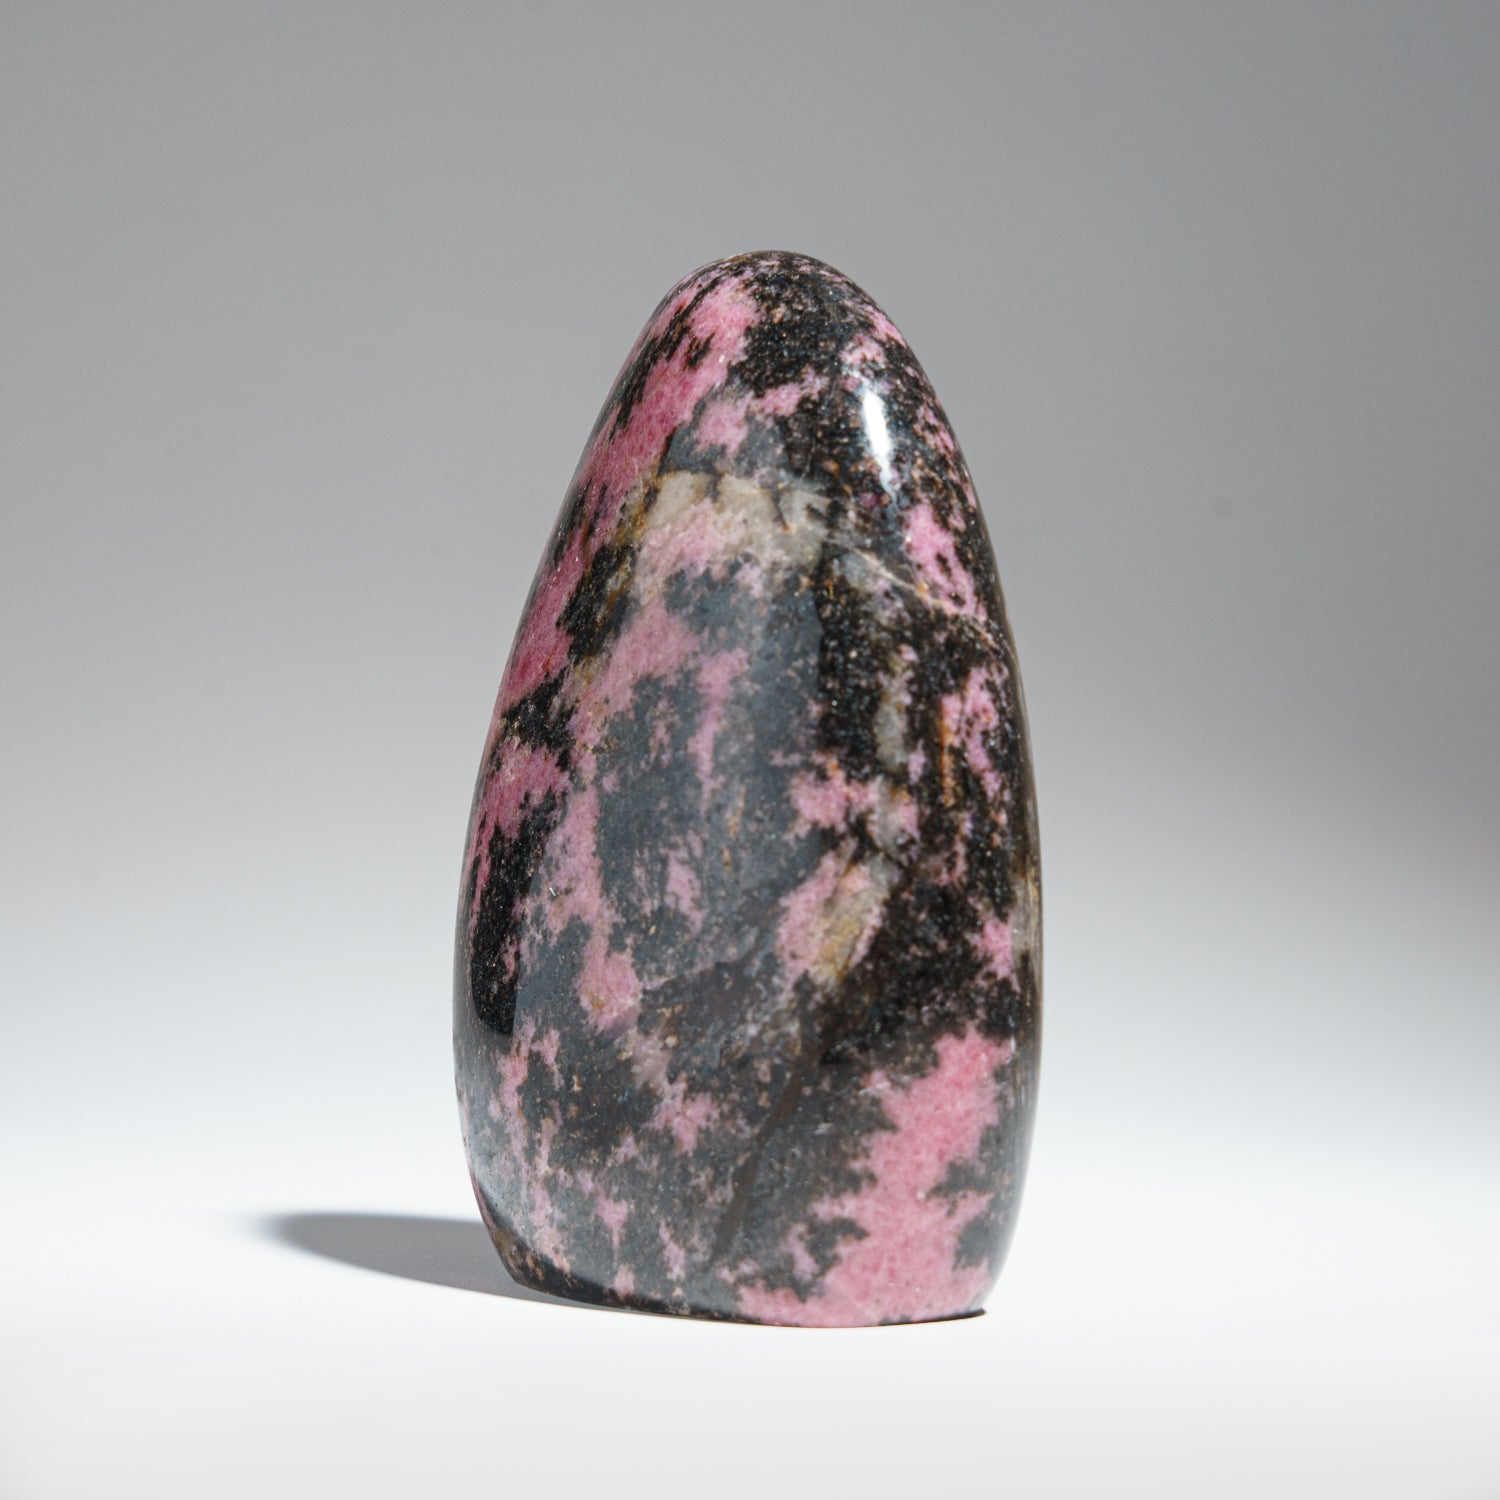 Polished Imperial Rhodonite Freeform from Madagascar (1.75 lbs)